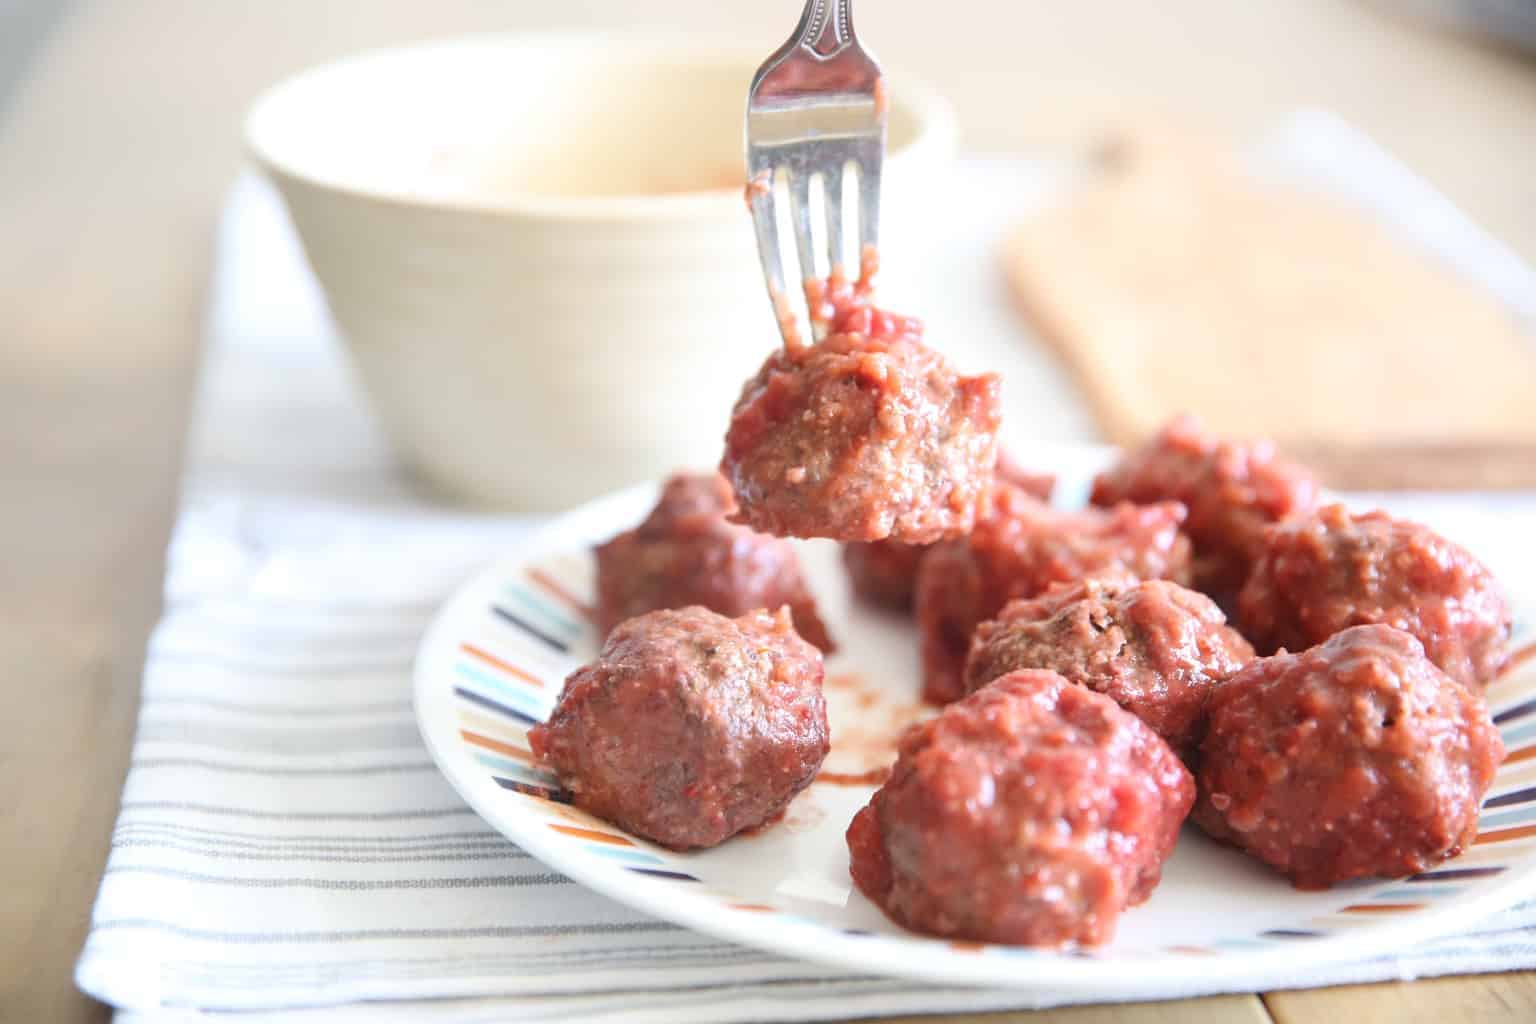 Gluten free and dairy free meatballs on a white plate